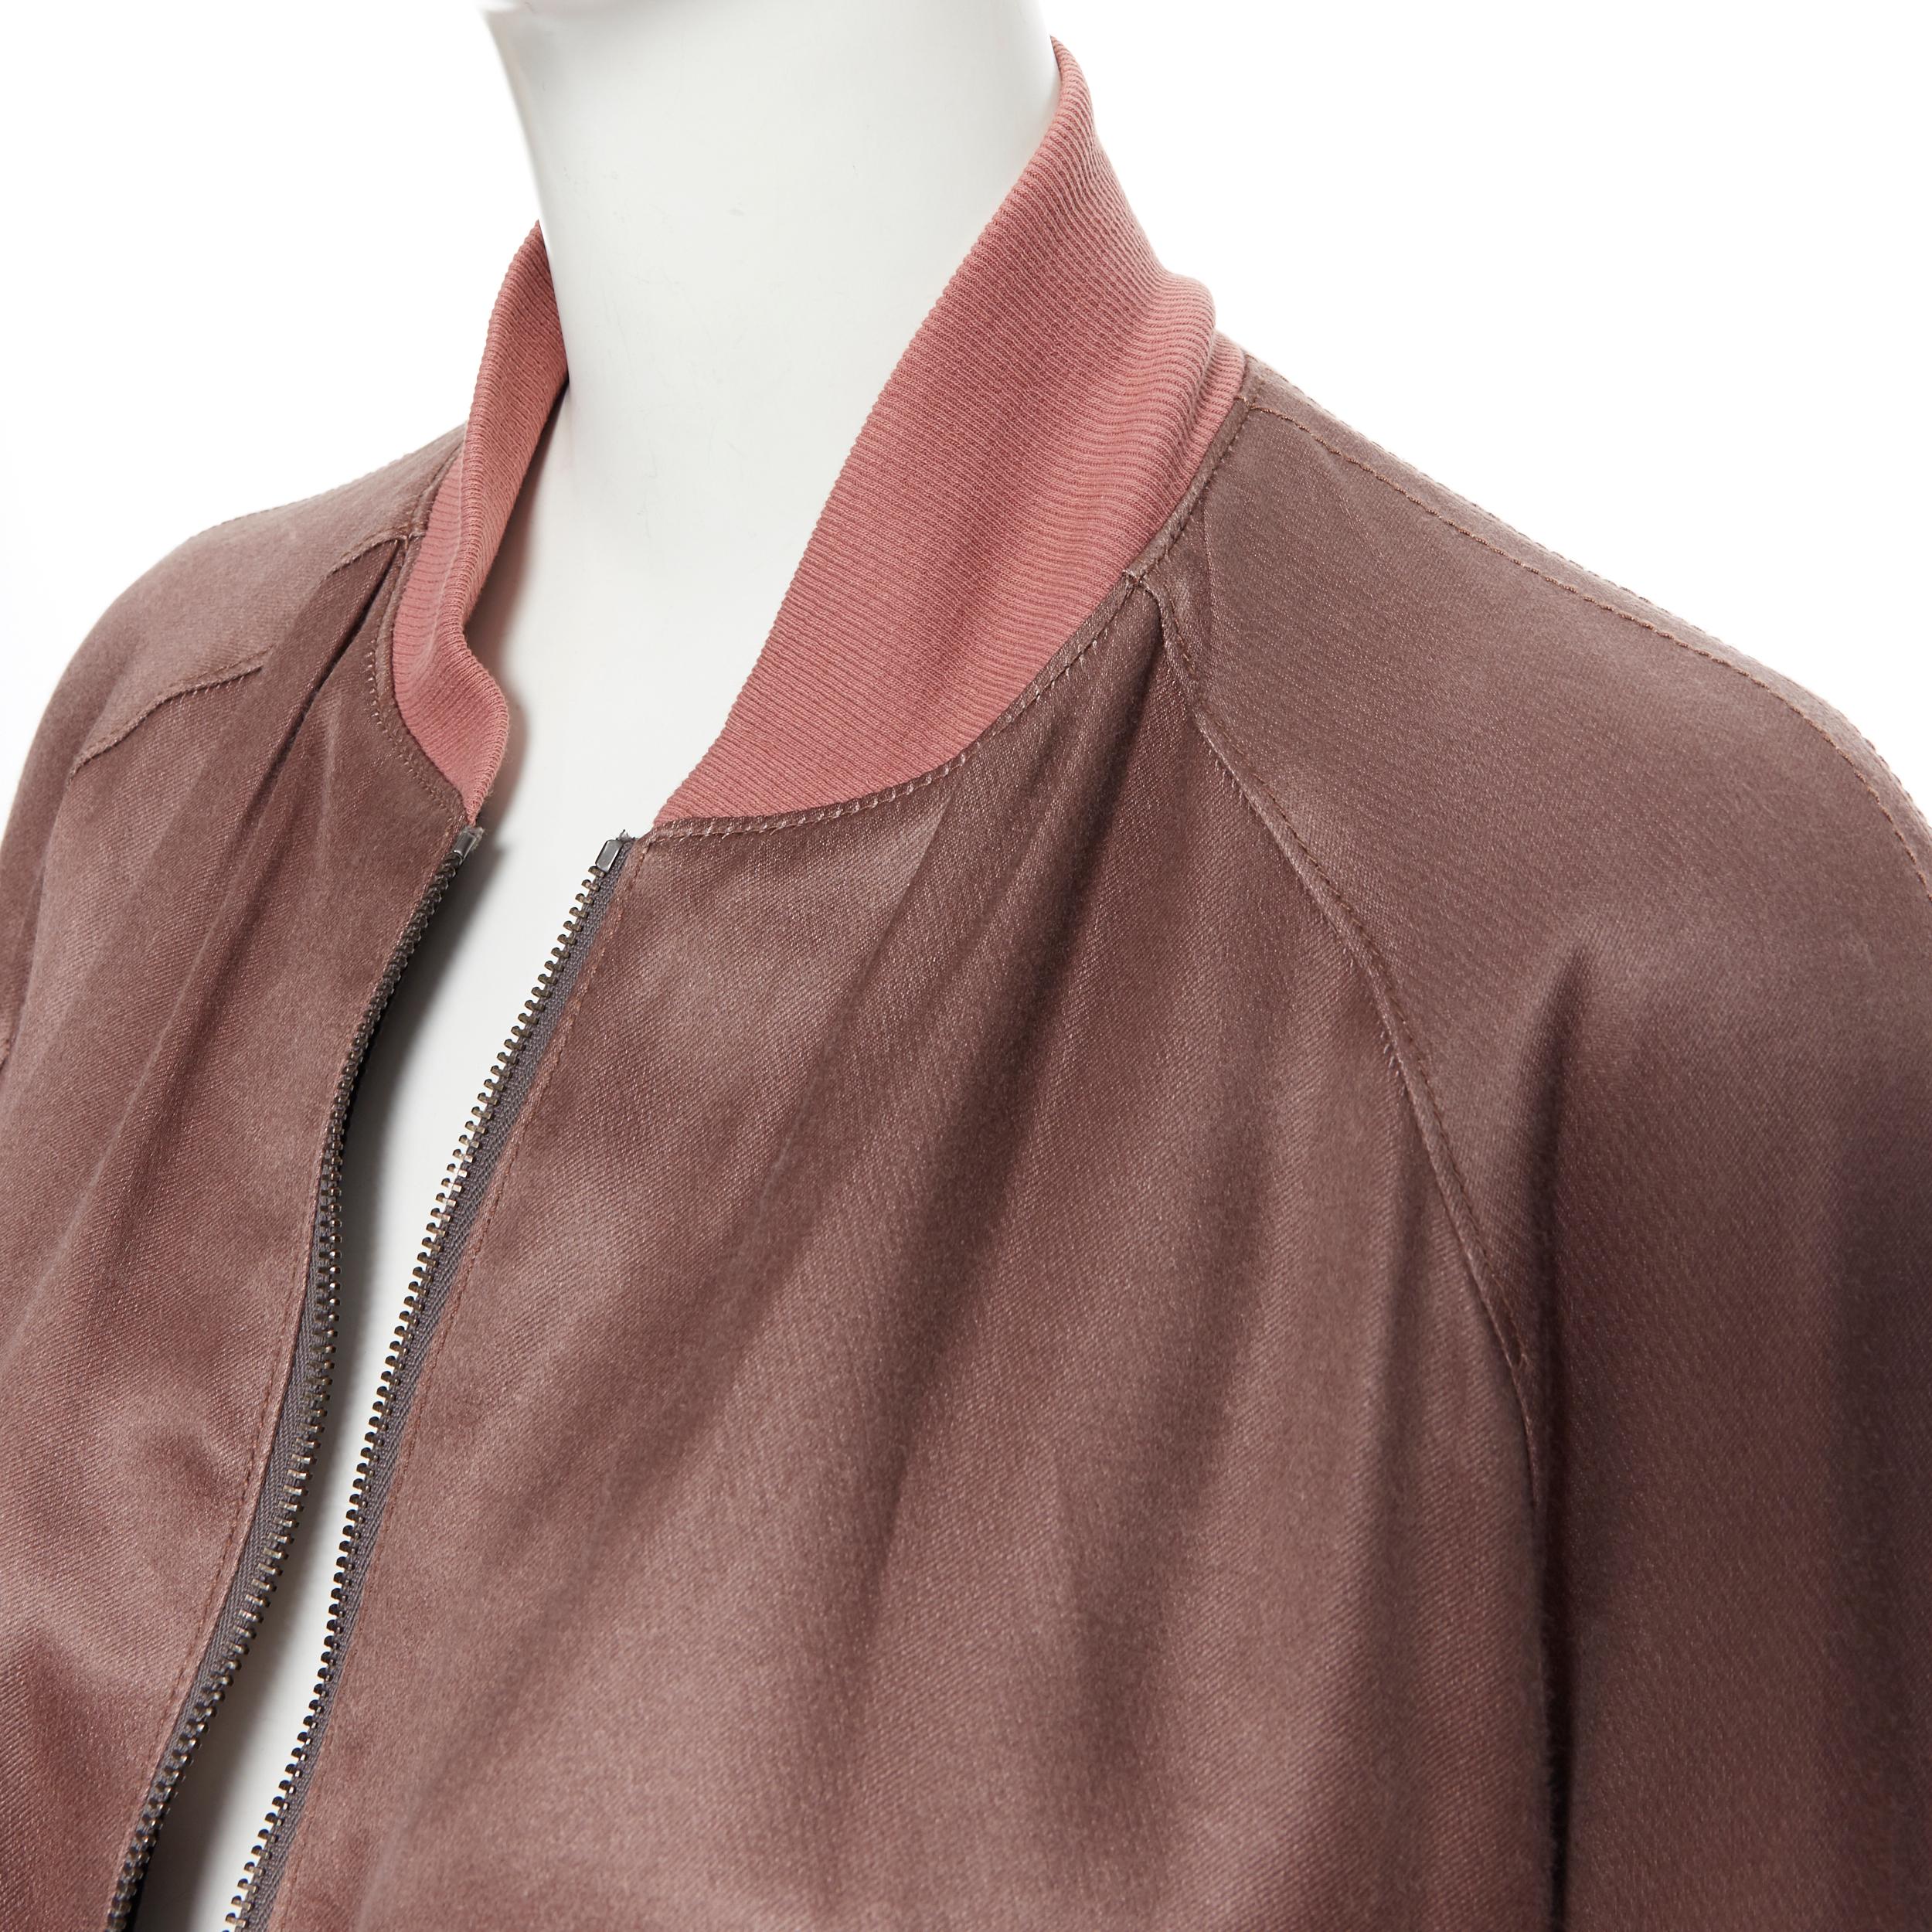 HAIDER ACKERMANN dusty pink rayon silk blend zip up bomber jacket FR34 XS
Brand: Haider Ackermann
Designer: Haider Ackermann
Model Name / Style: Silk bomber
Material: Rayon silk
Color: Pink
Pattern: Solid
Closure: Zip
Extra Detail: Long sleeve.
Made